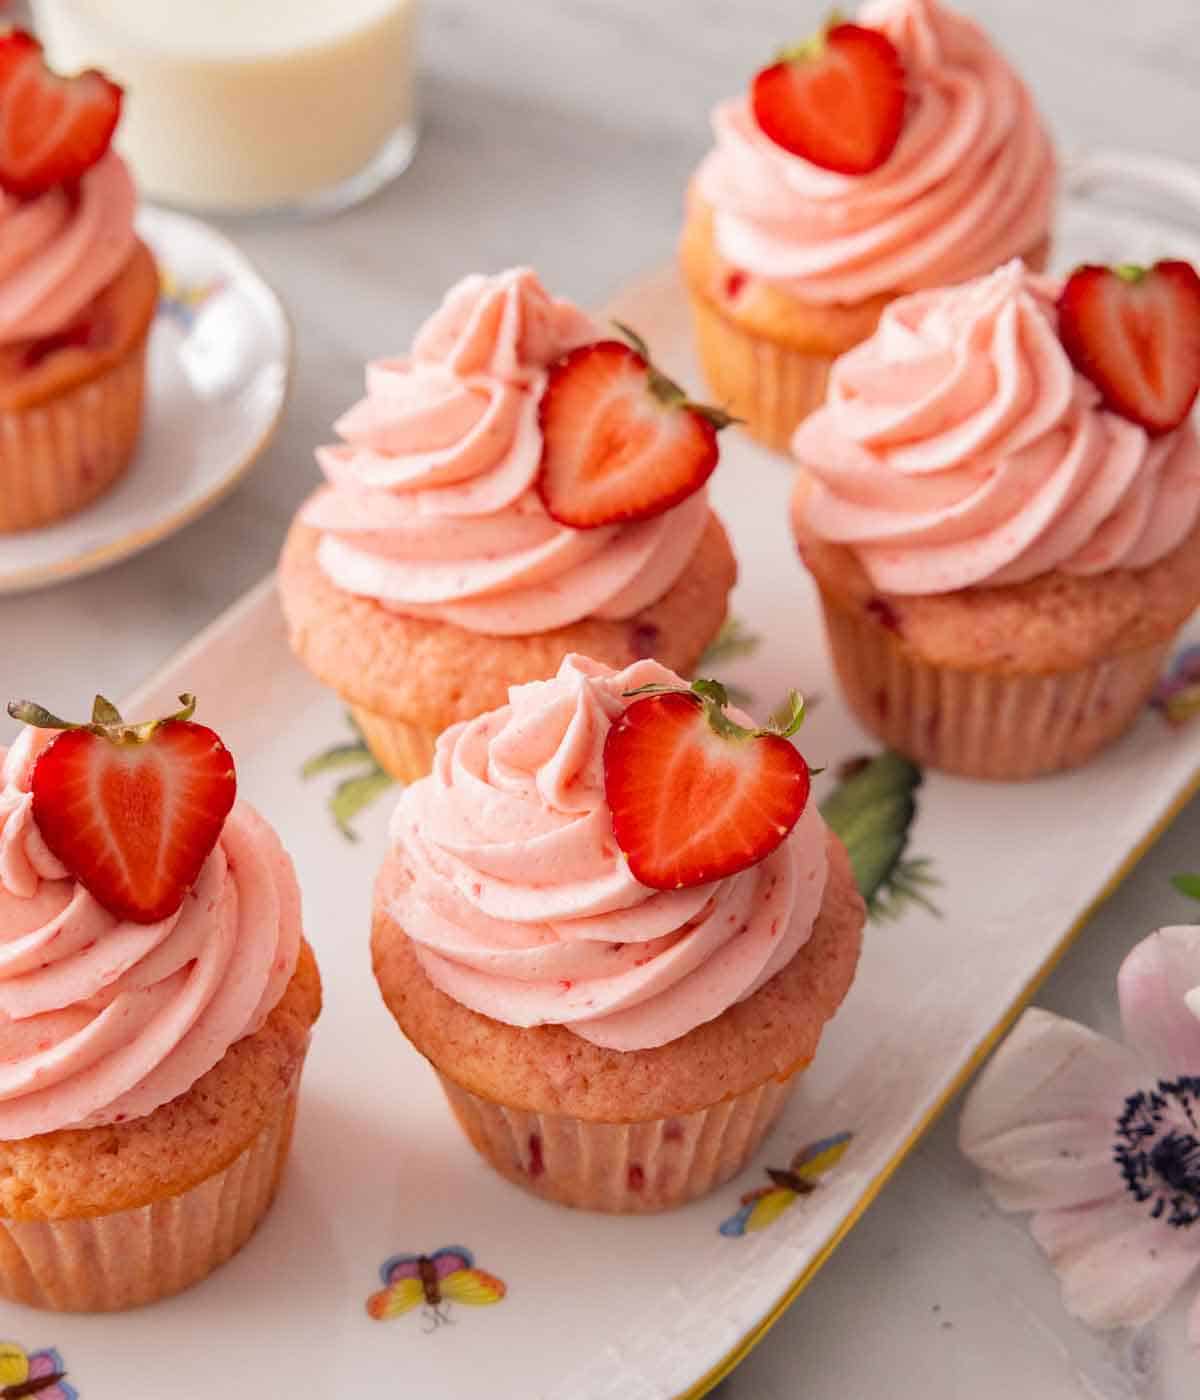 A long platter with multiple strawberry cupcakes with pink frosting and sliced strawberries on top.